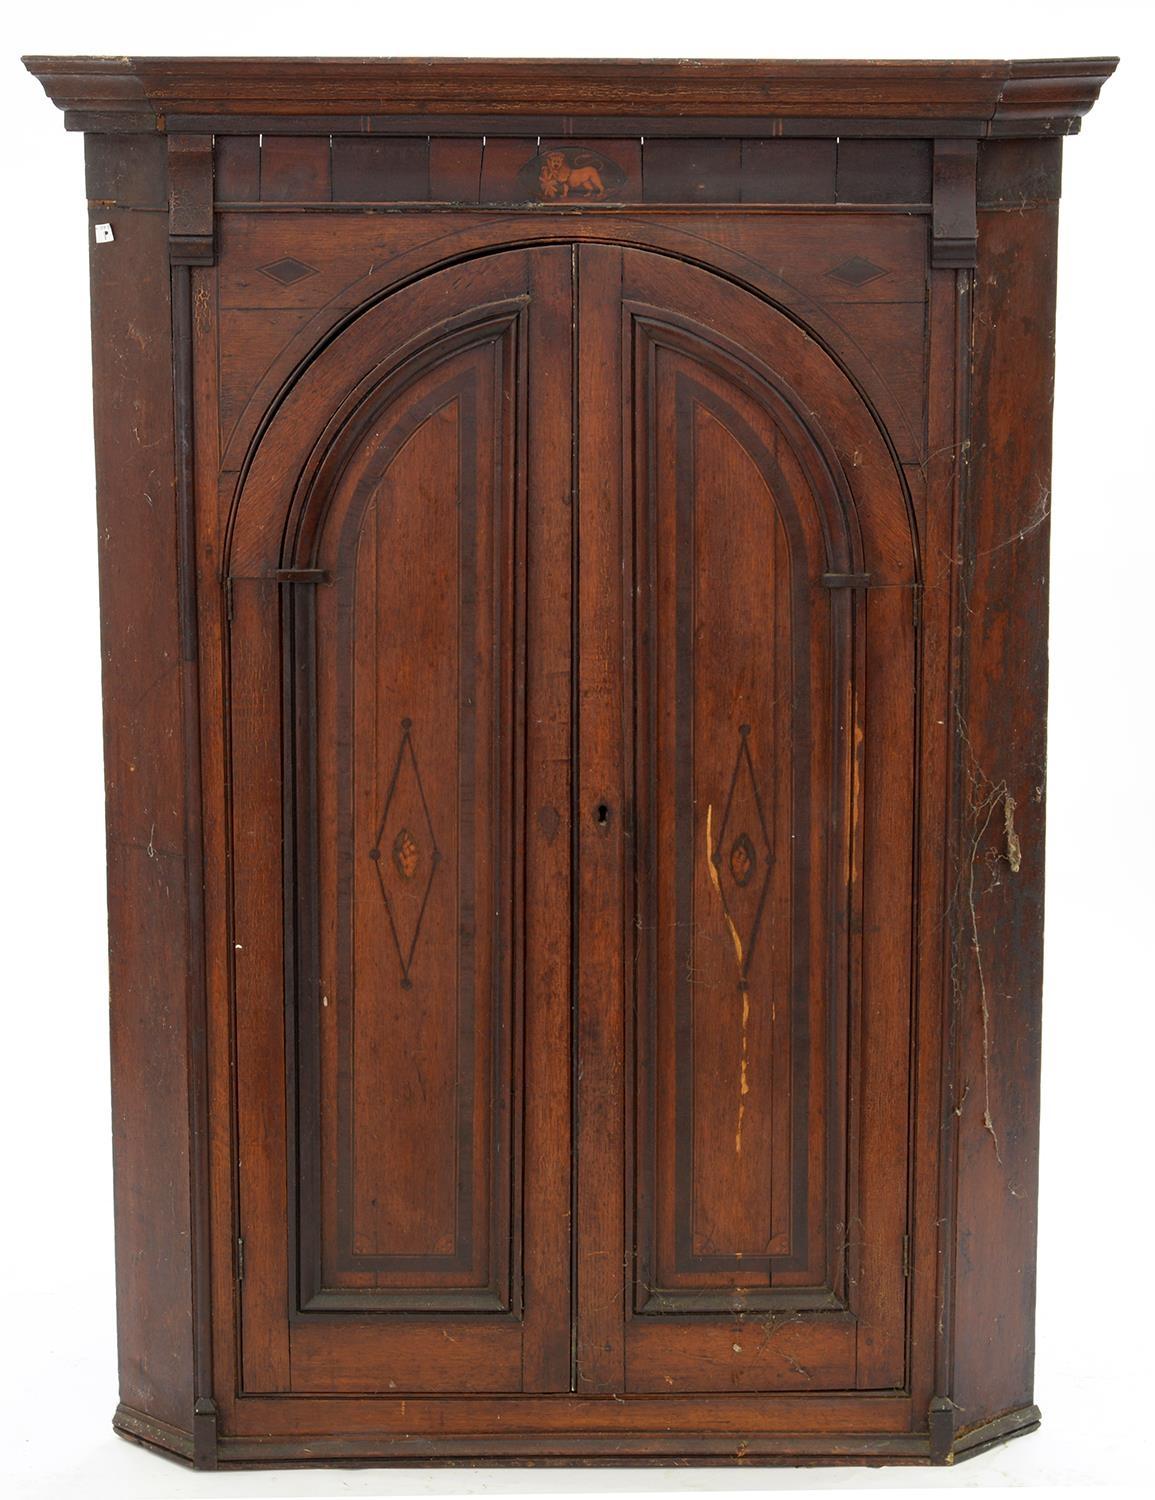 A GEORGE III INLAID OAK CORNER CUPBOARD WITH ARCH PANELLED DOORS WITH LION PATERAE, 135CM H; 101 X